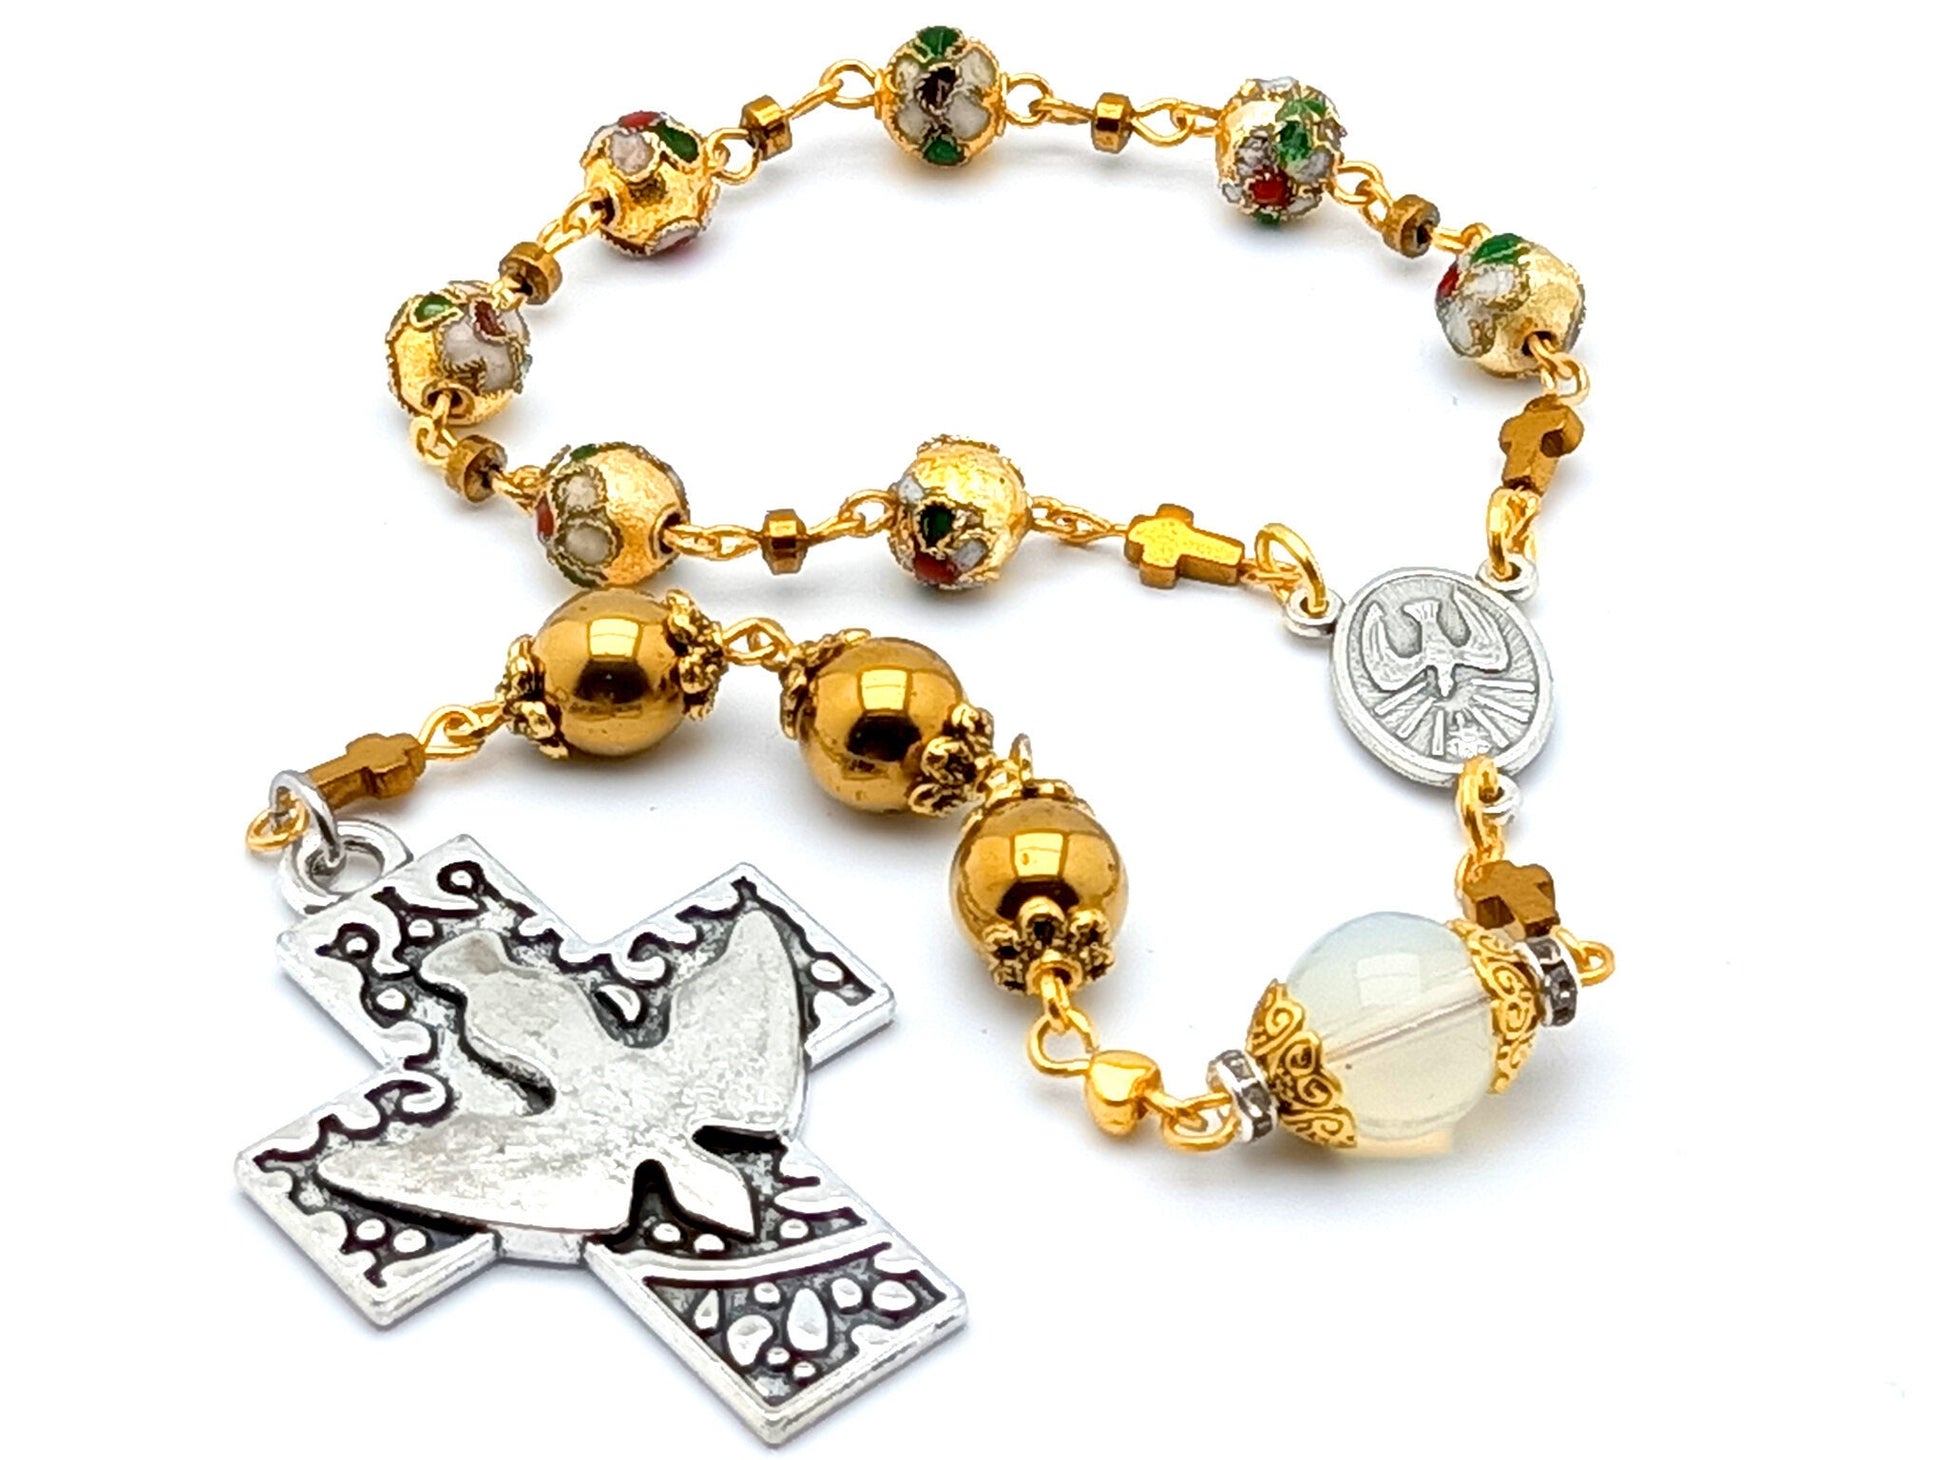 Holy Spirit unique rpsary beads prayer chaplet with cloisonne and hematite gemstone beads and Holy Spirit centre and cross.